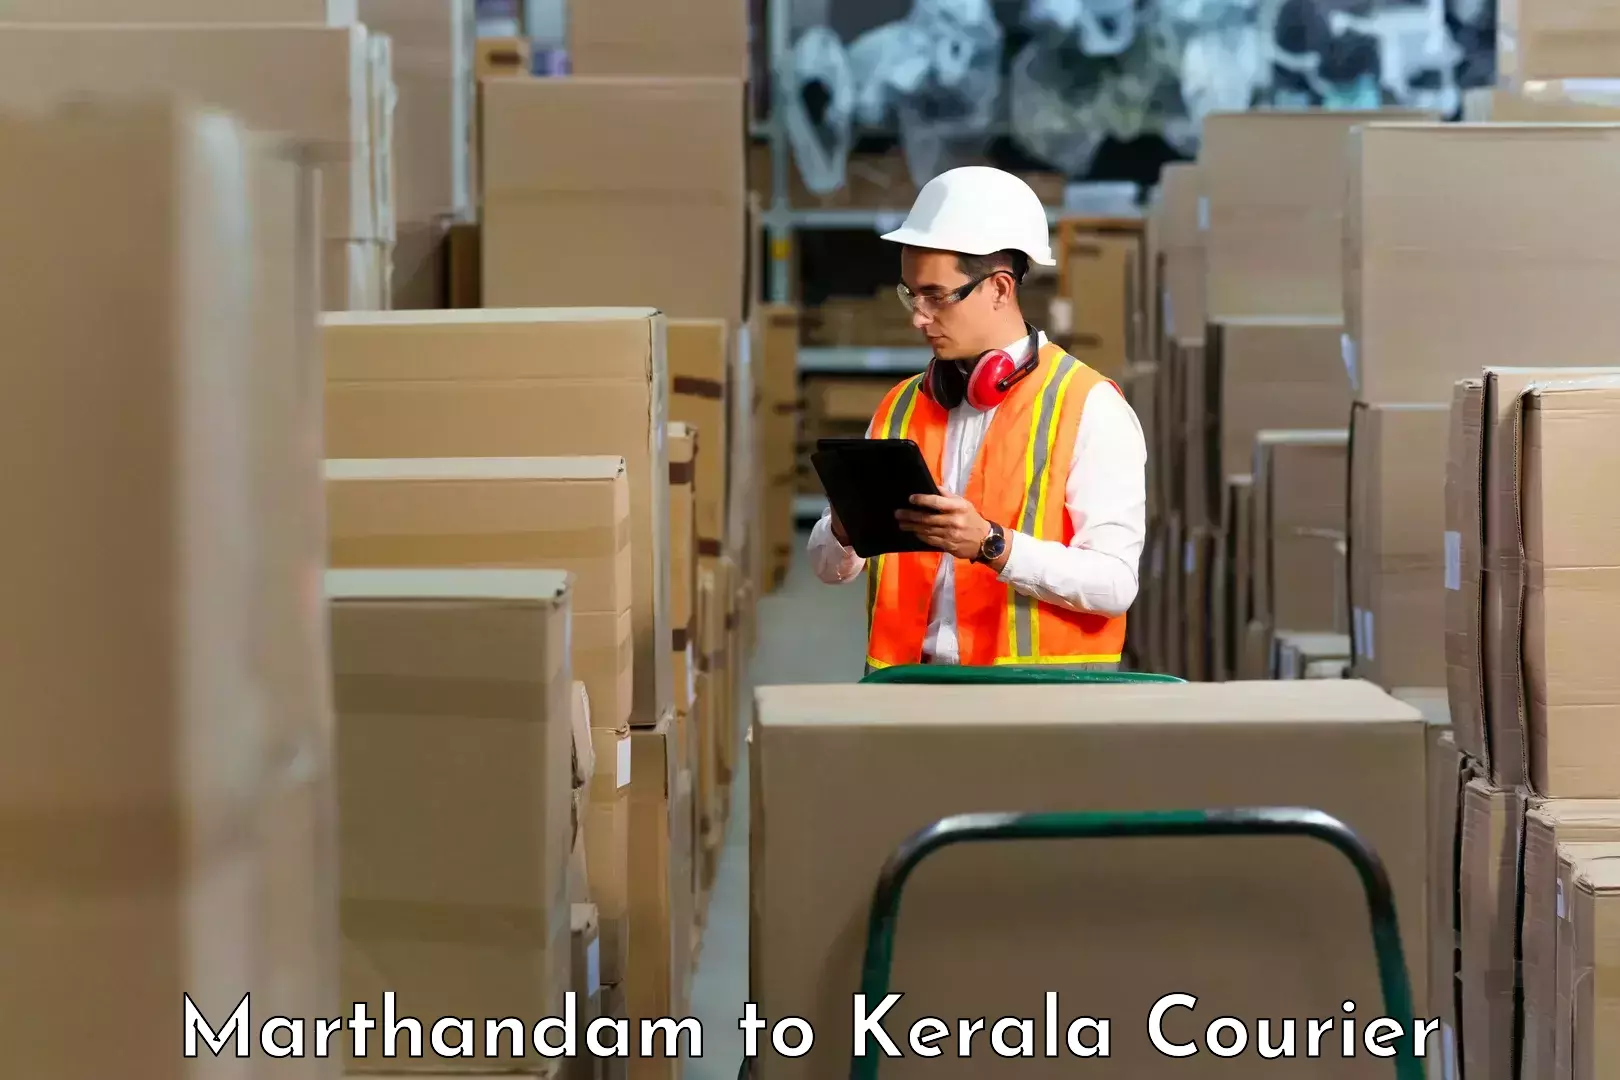 On-call courier service in Marthandam to Nedumangad